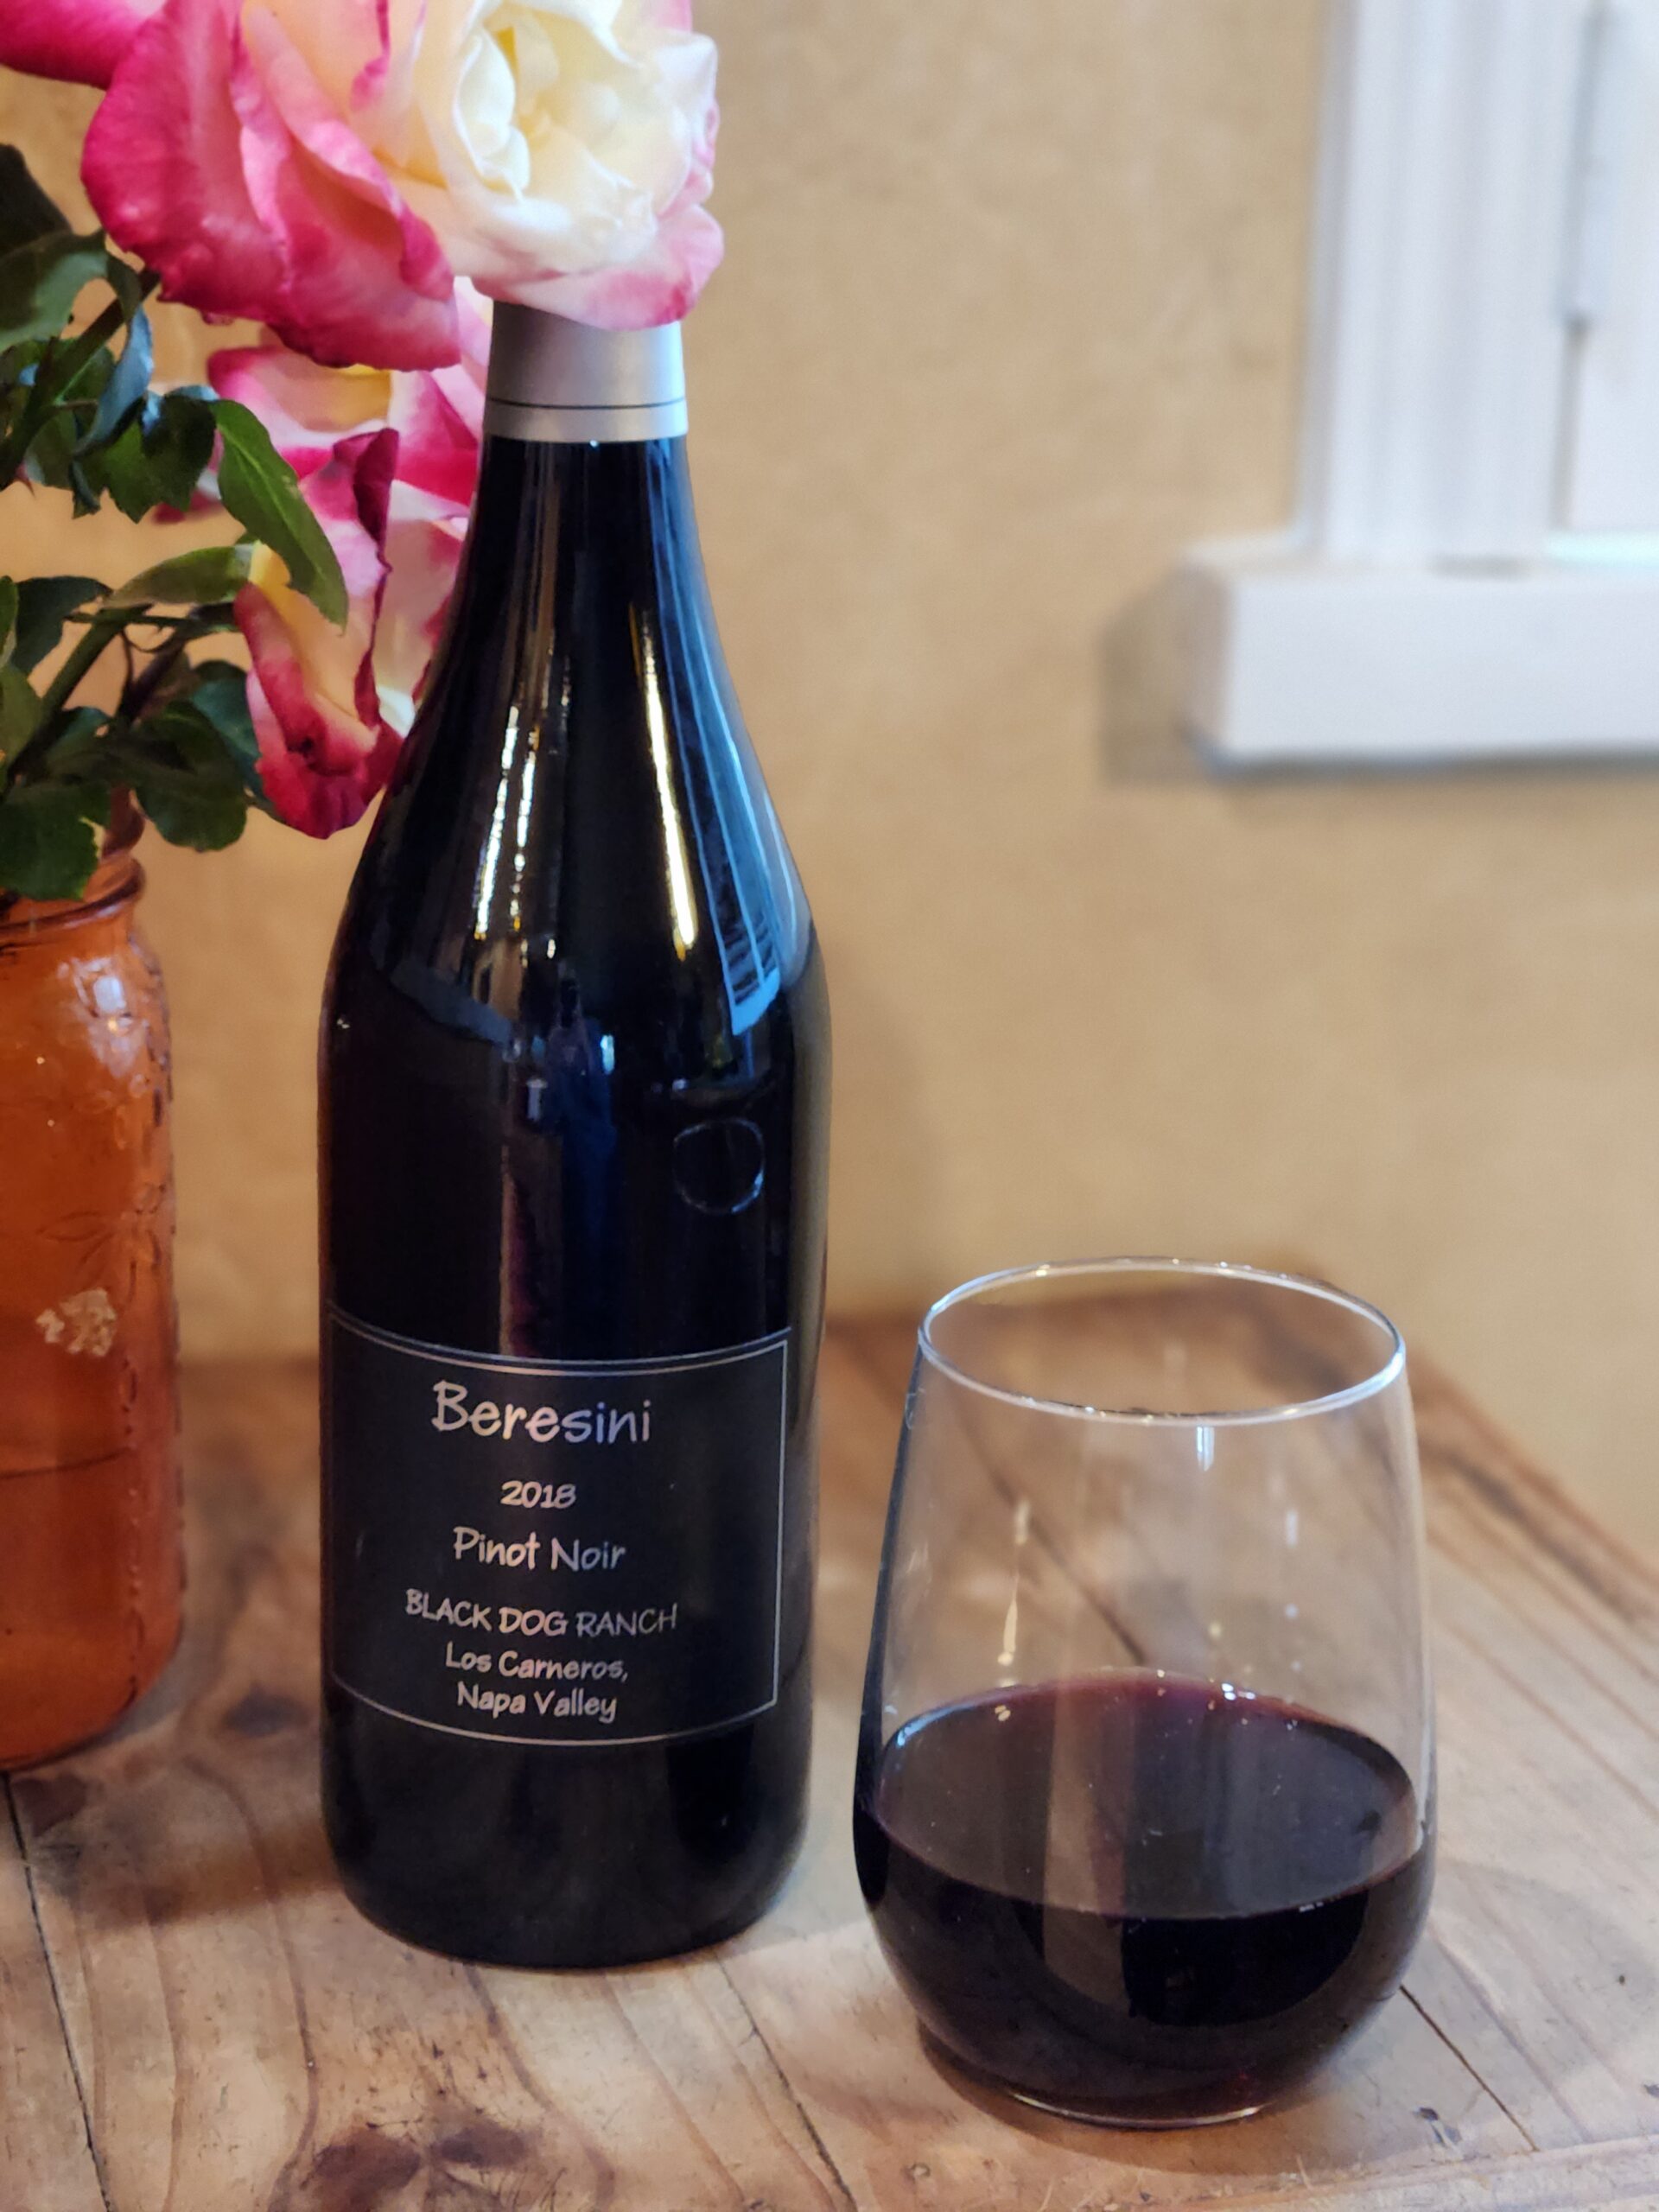 Bottle of 2019 Pinot Noir on a picnic table next to a vase of flowers and glass of wine